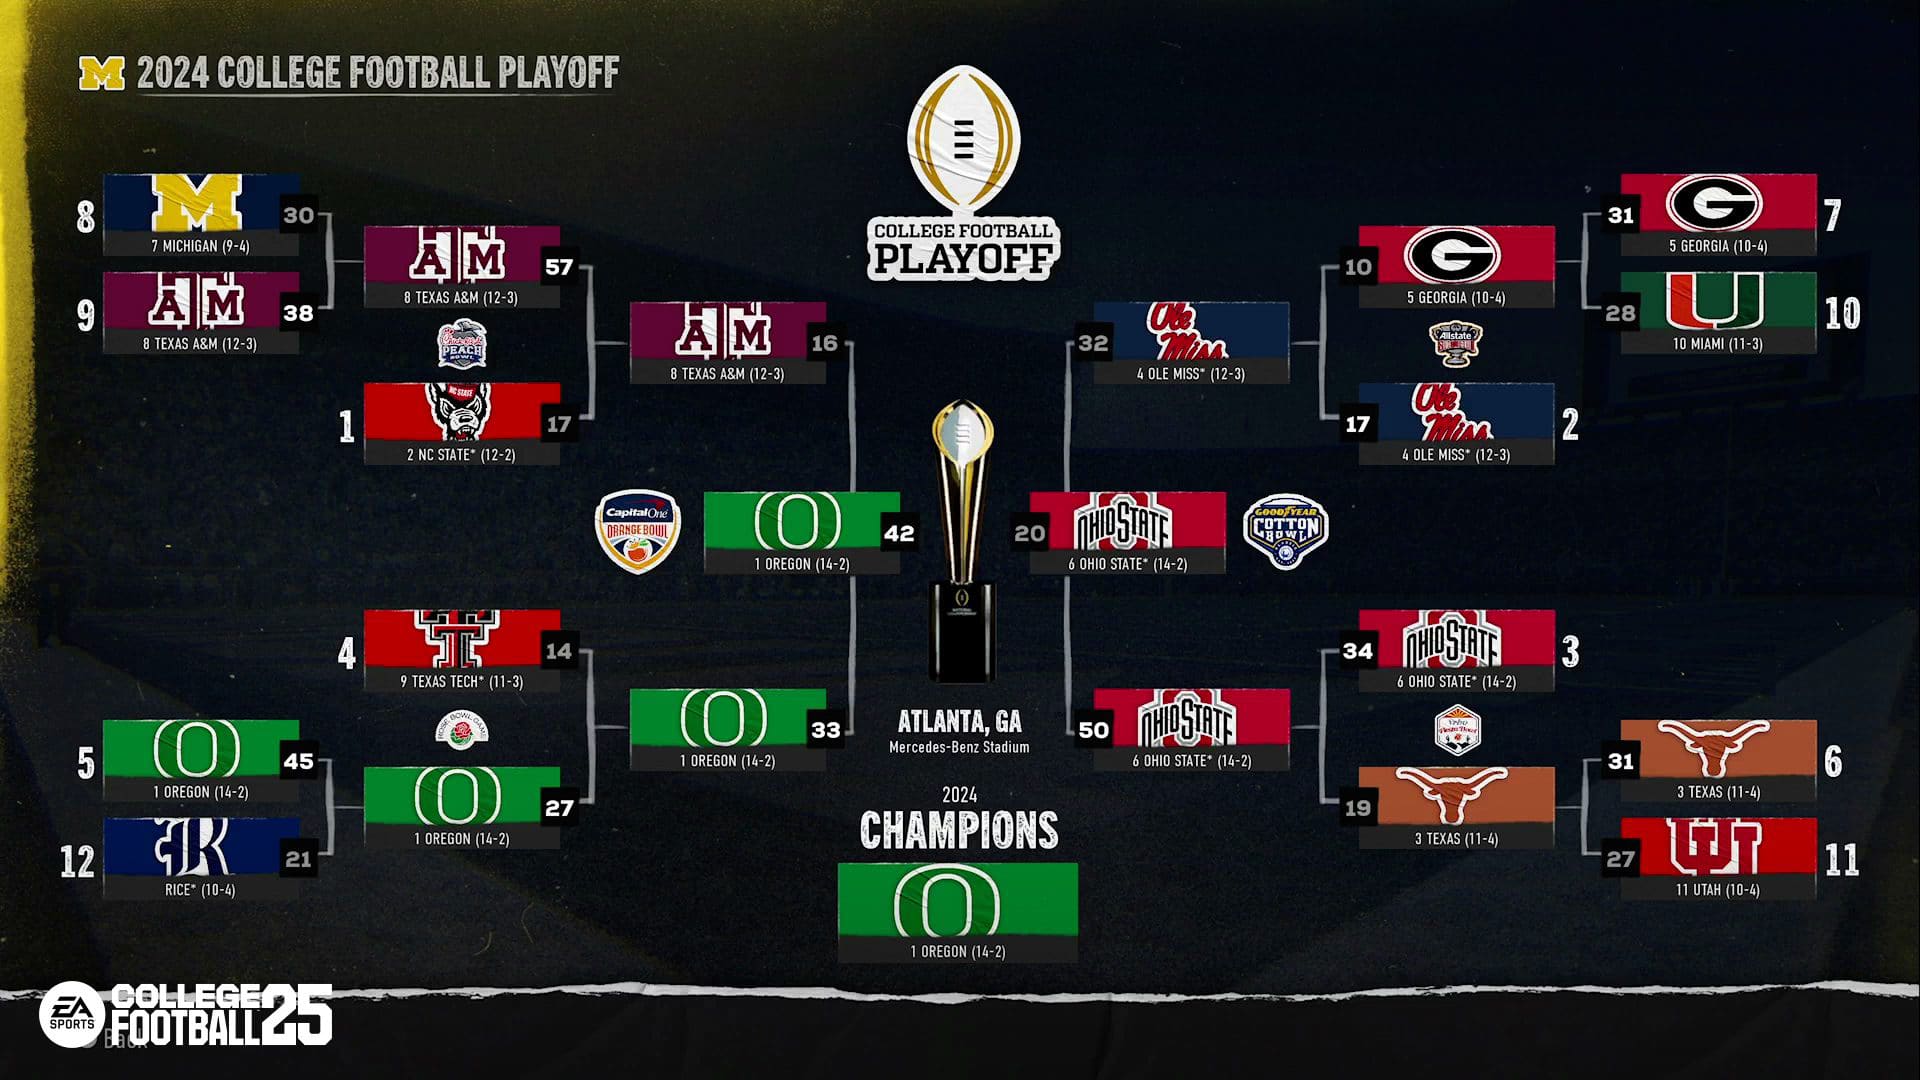 12 Team College Football Playoff Coming To College Football 25